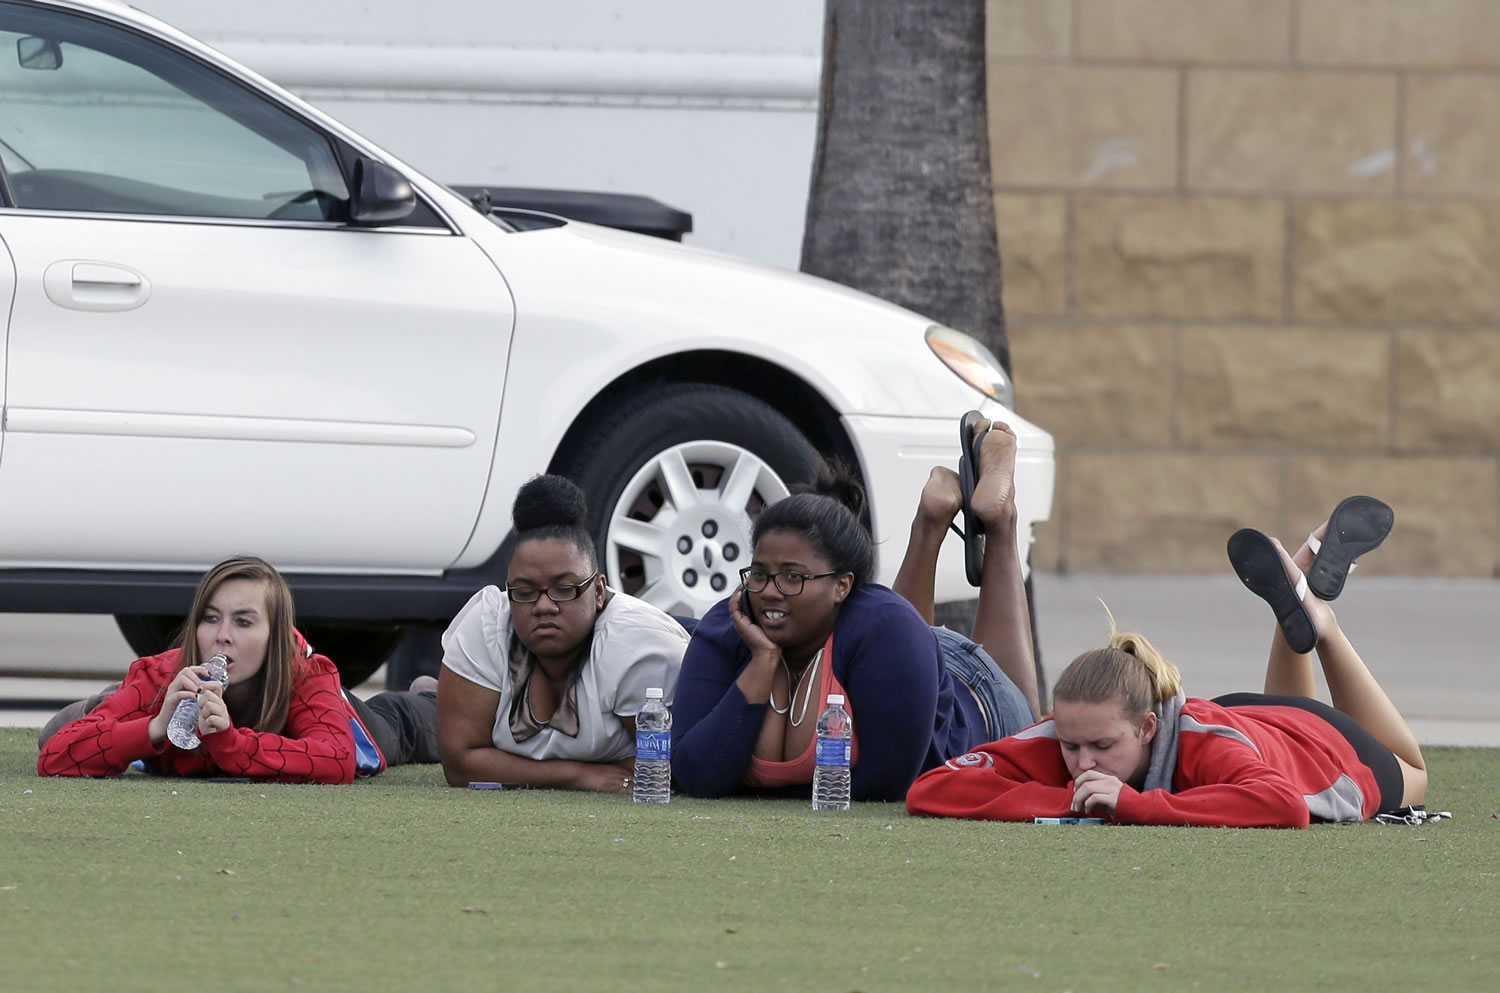 University of Central Florida students wait outside the college sports arena after explosive devices were found in a nearby dorm on Monday in Orlando, Fla.